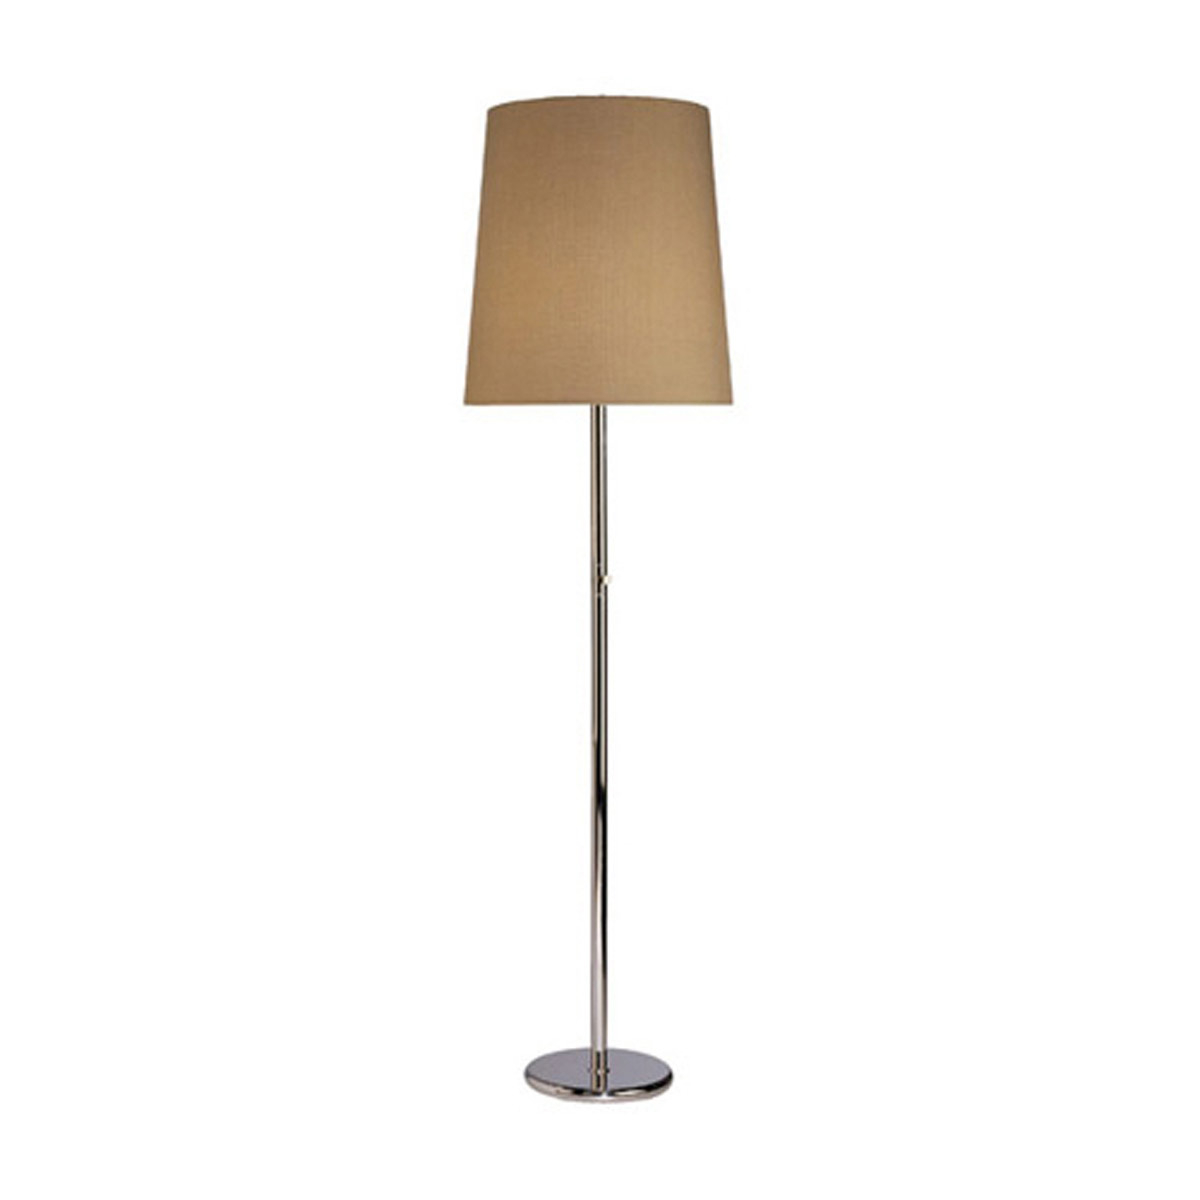 Buster Floor Lamp Robert Abbey Ra 2057 throughout sizing 1200 X 1200